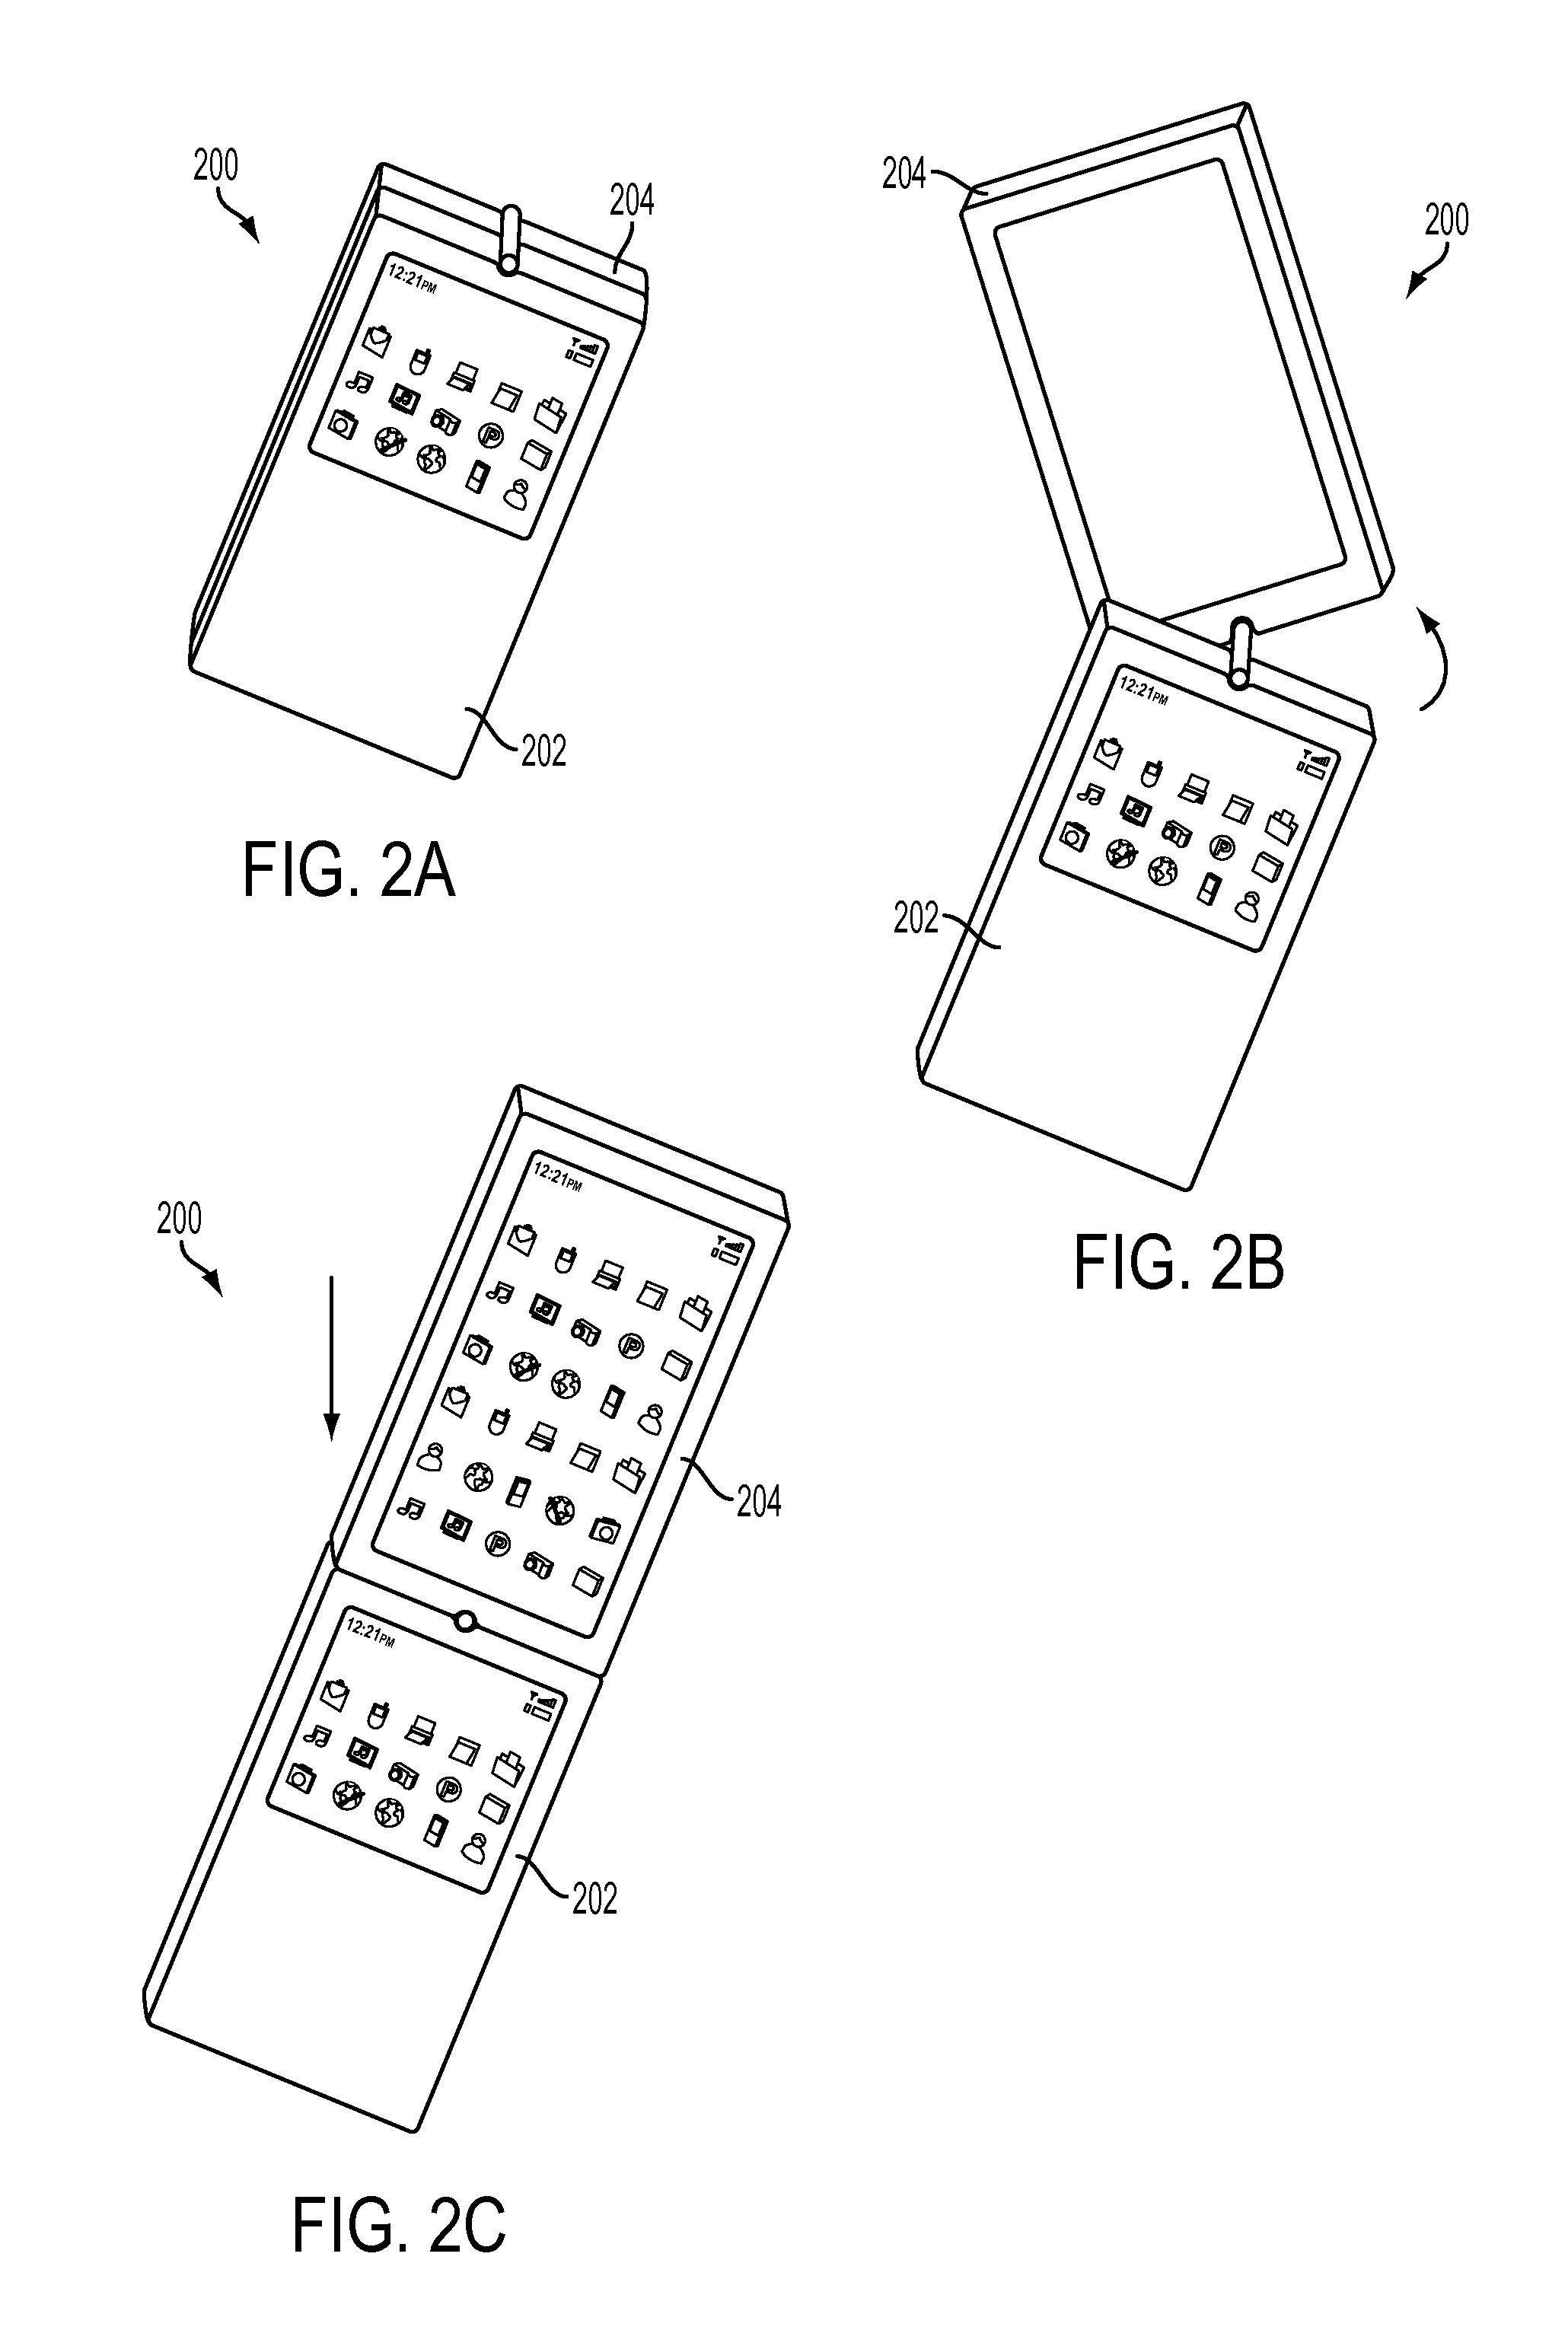 Multiple displays for a portable electronic device and a method of use